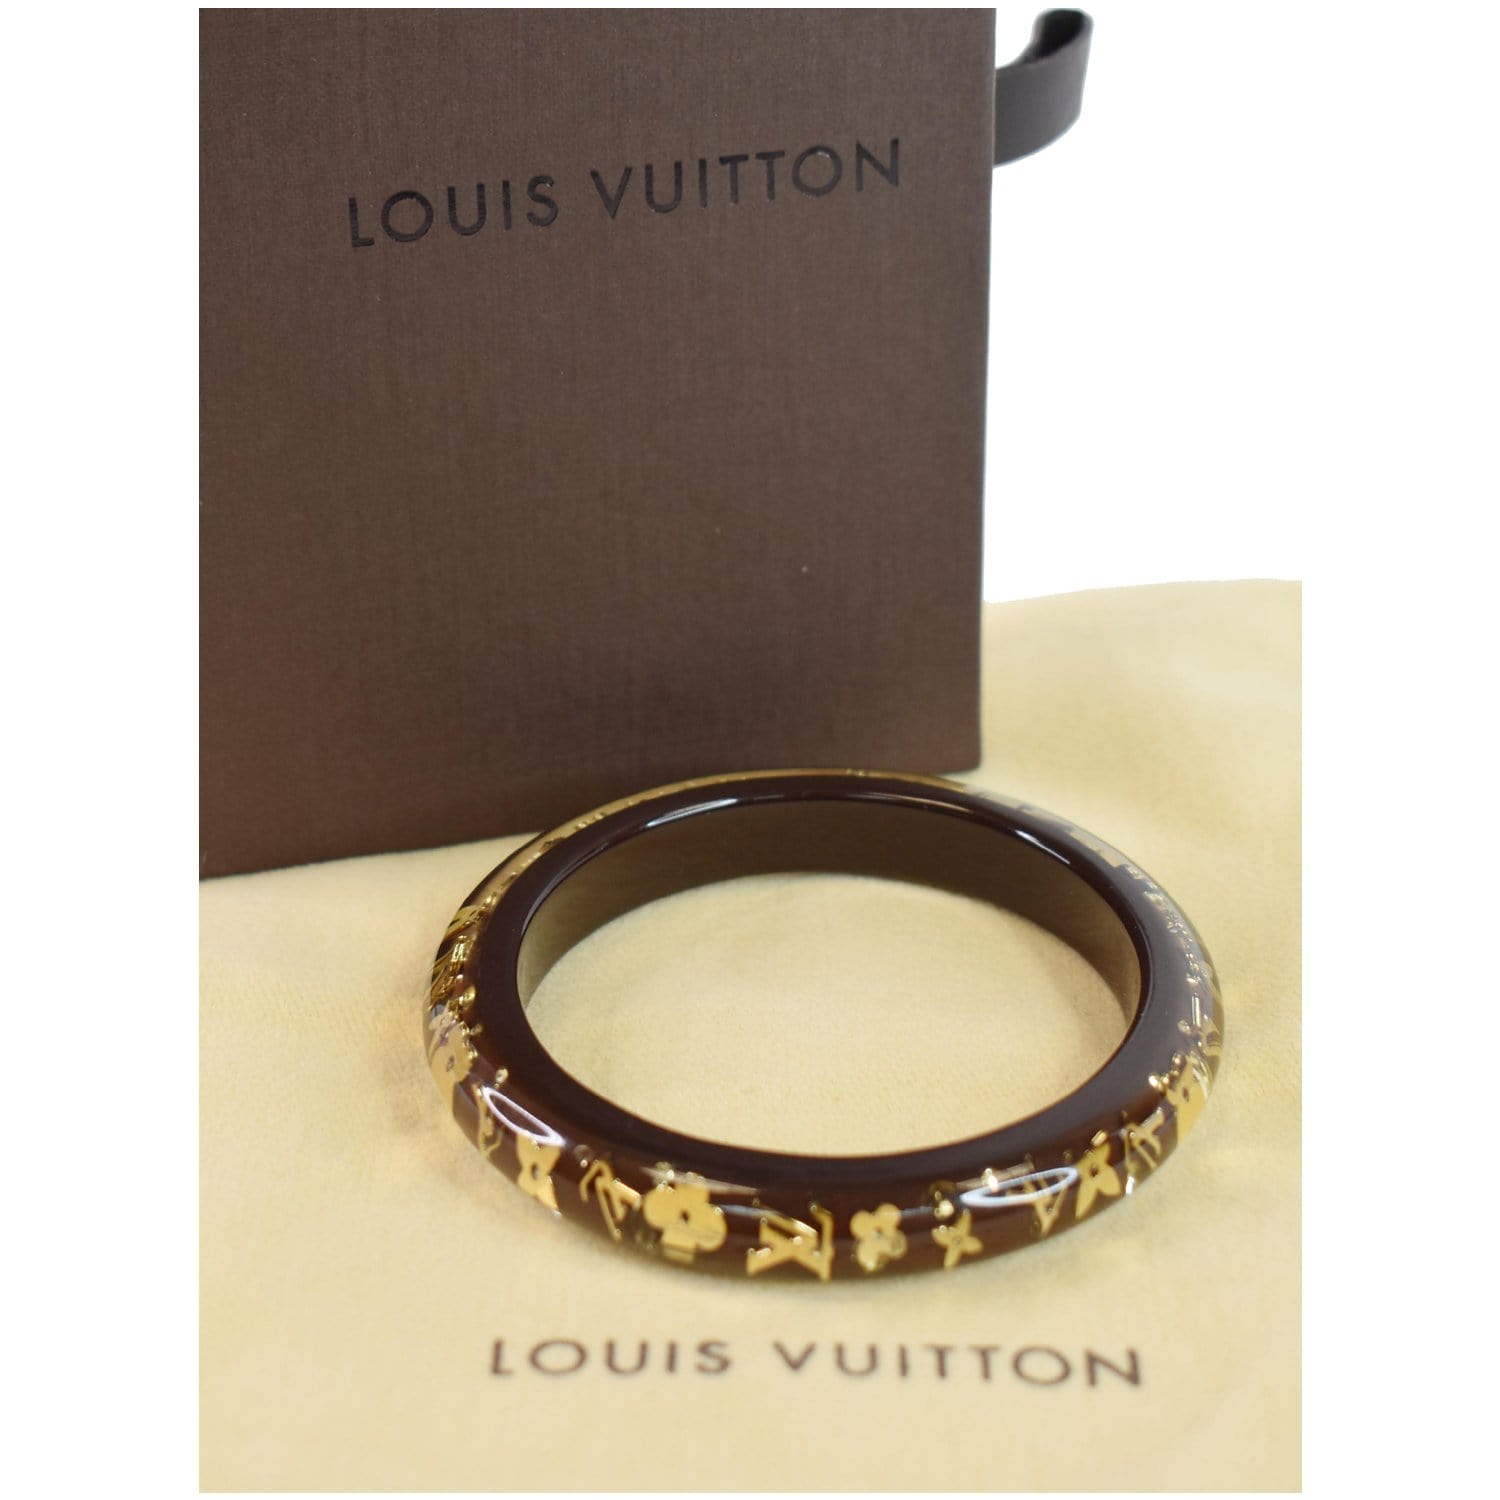 Louis Vuitton - Authenticated Inclusion Ring - Plastic Black for Women, Very Good Condition